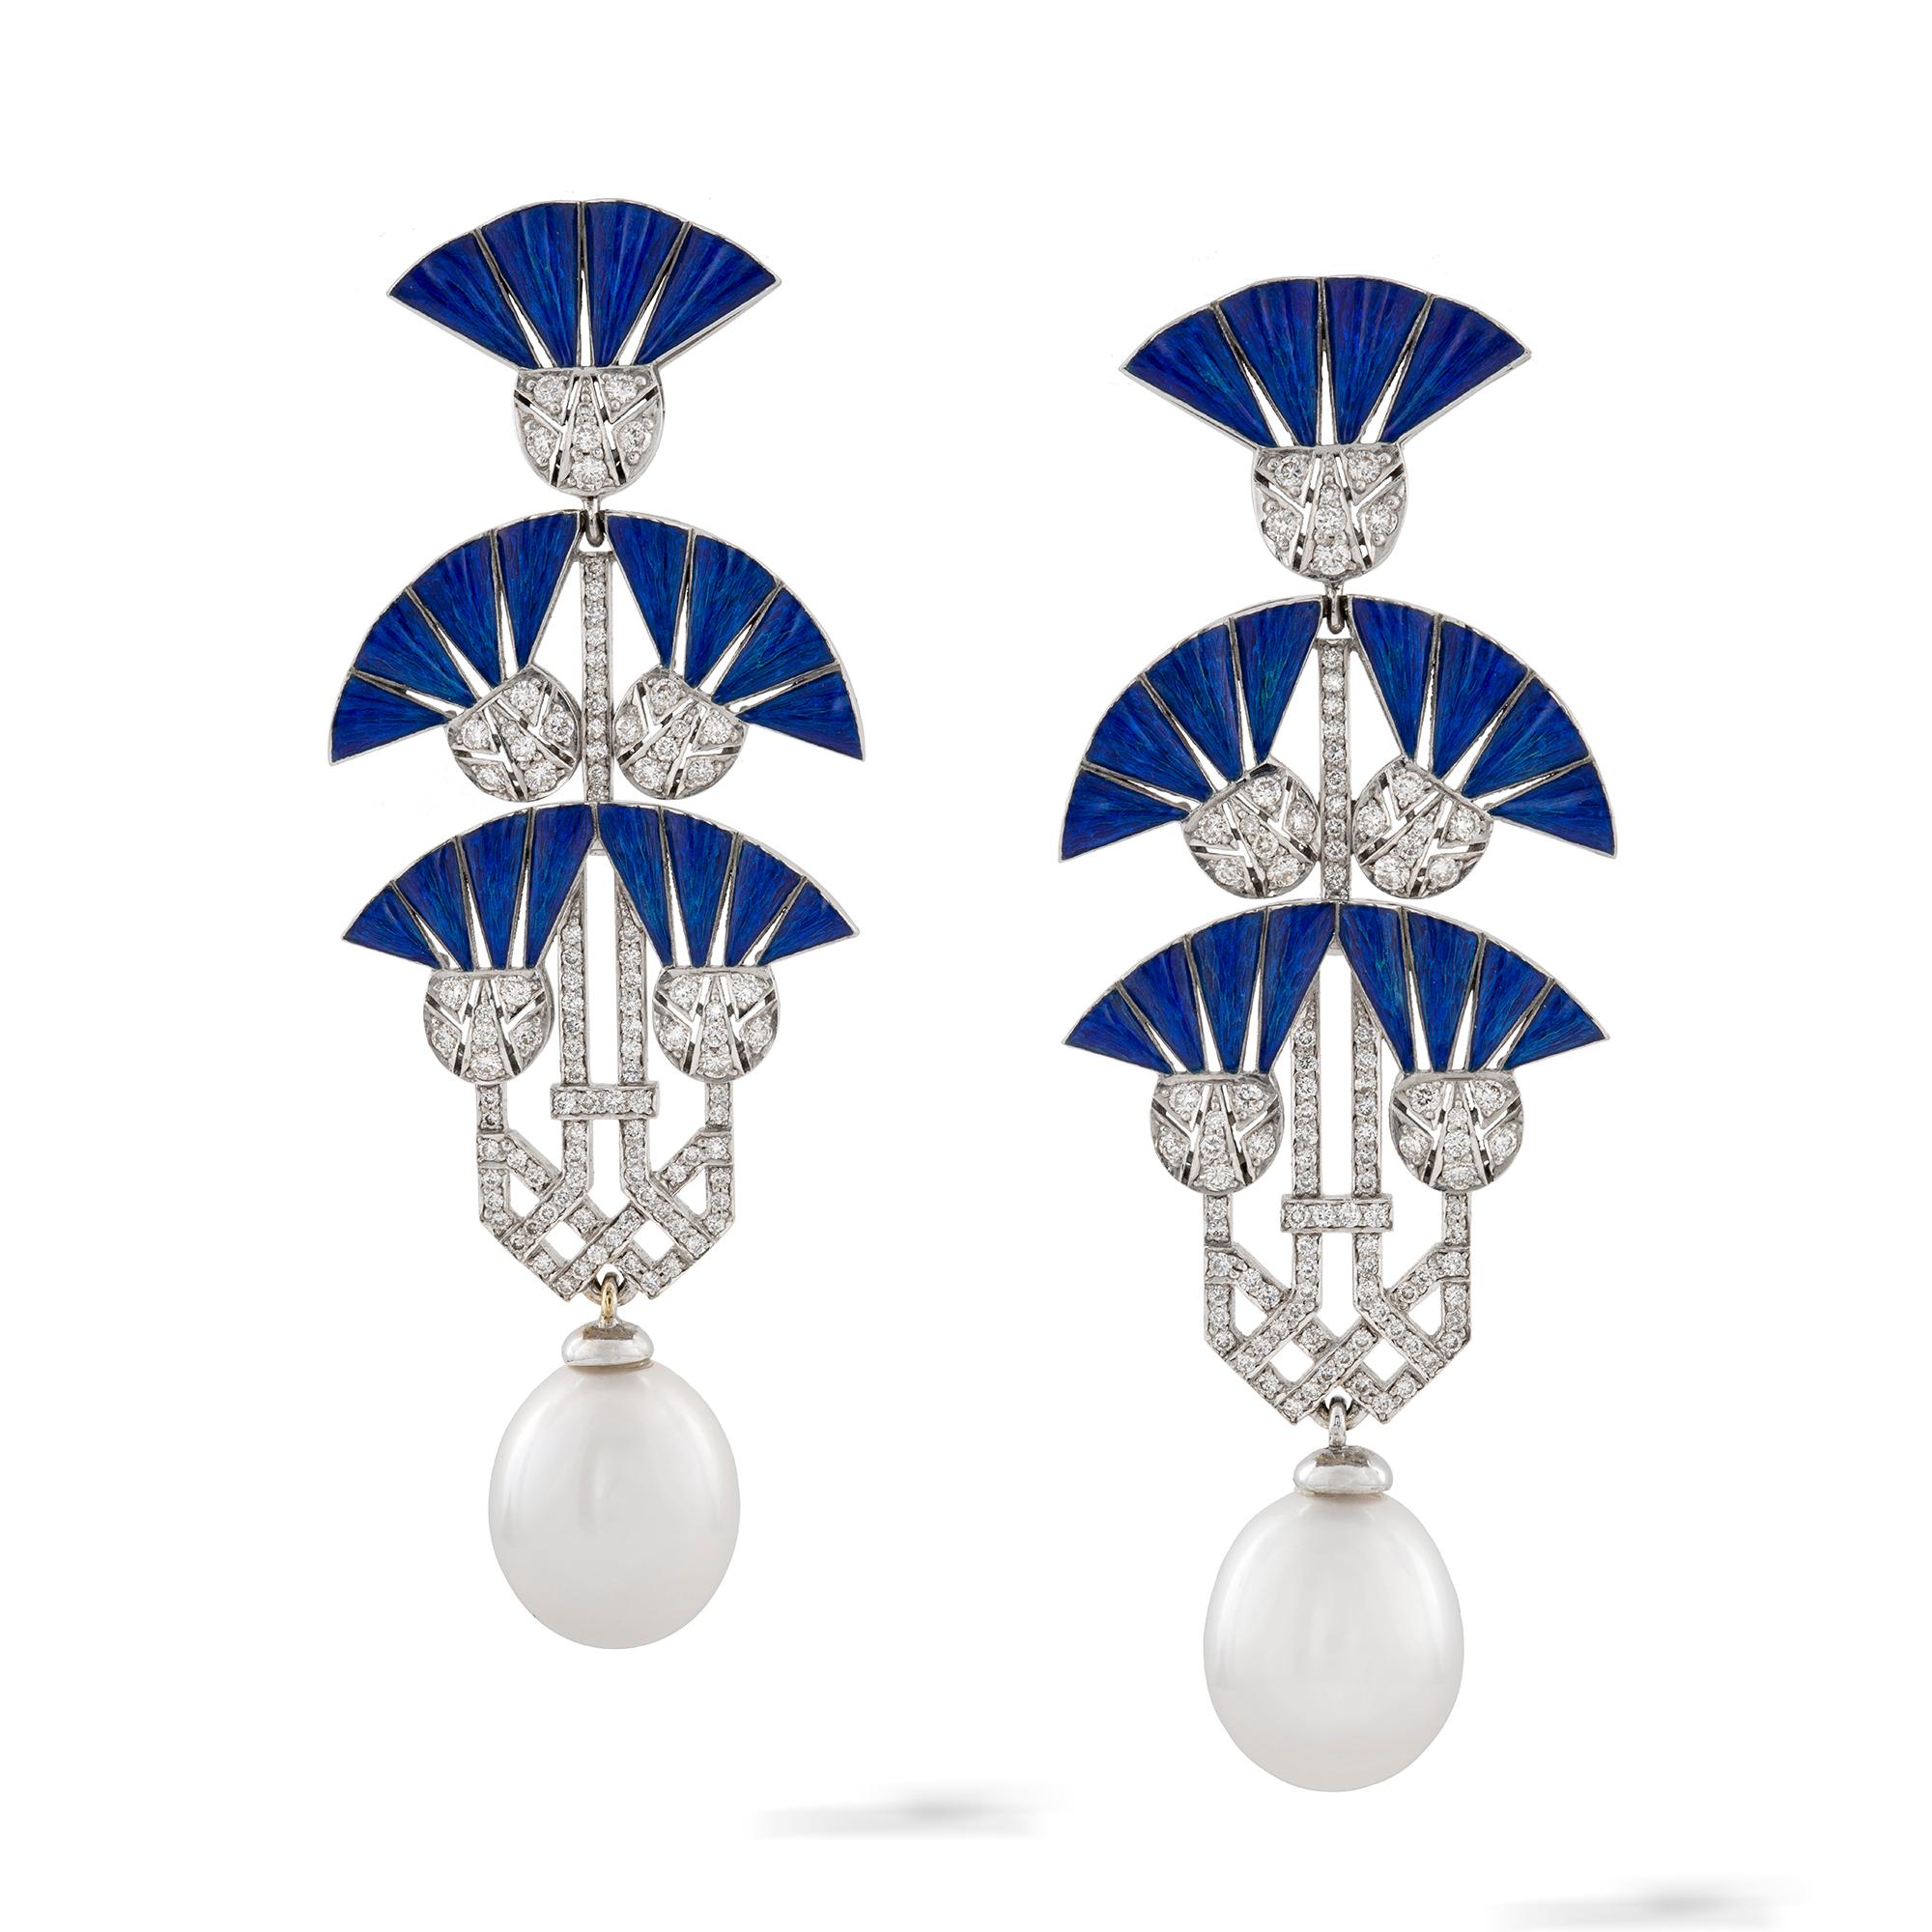 A pair of lotus earrings by Ilgiz F, each earring with five lotus flowers with blue champlevé enamelled petals and diamond set peduncles, suspending a drop shaped cultured pearl, the diamonds weighing 1.77 carats, all mounted in 18ct gold with post